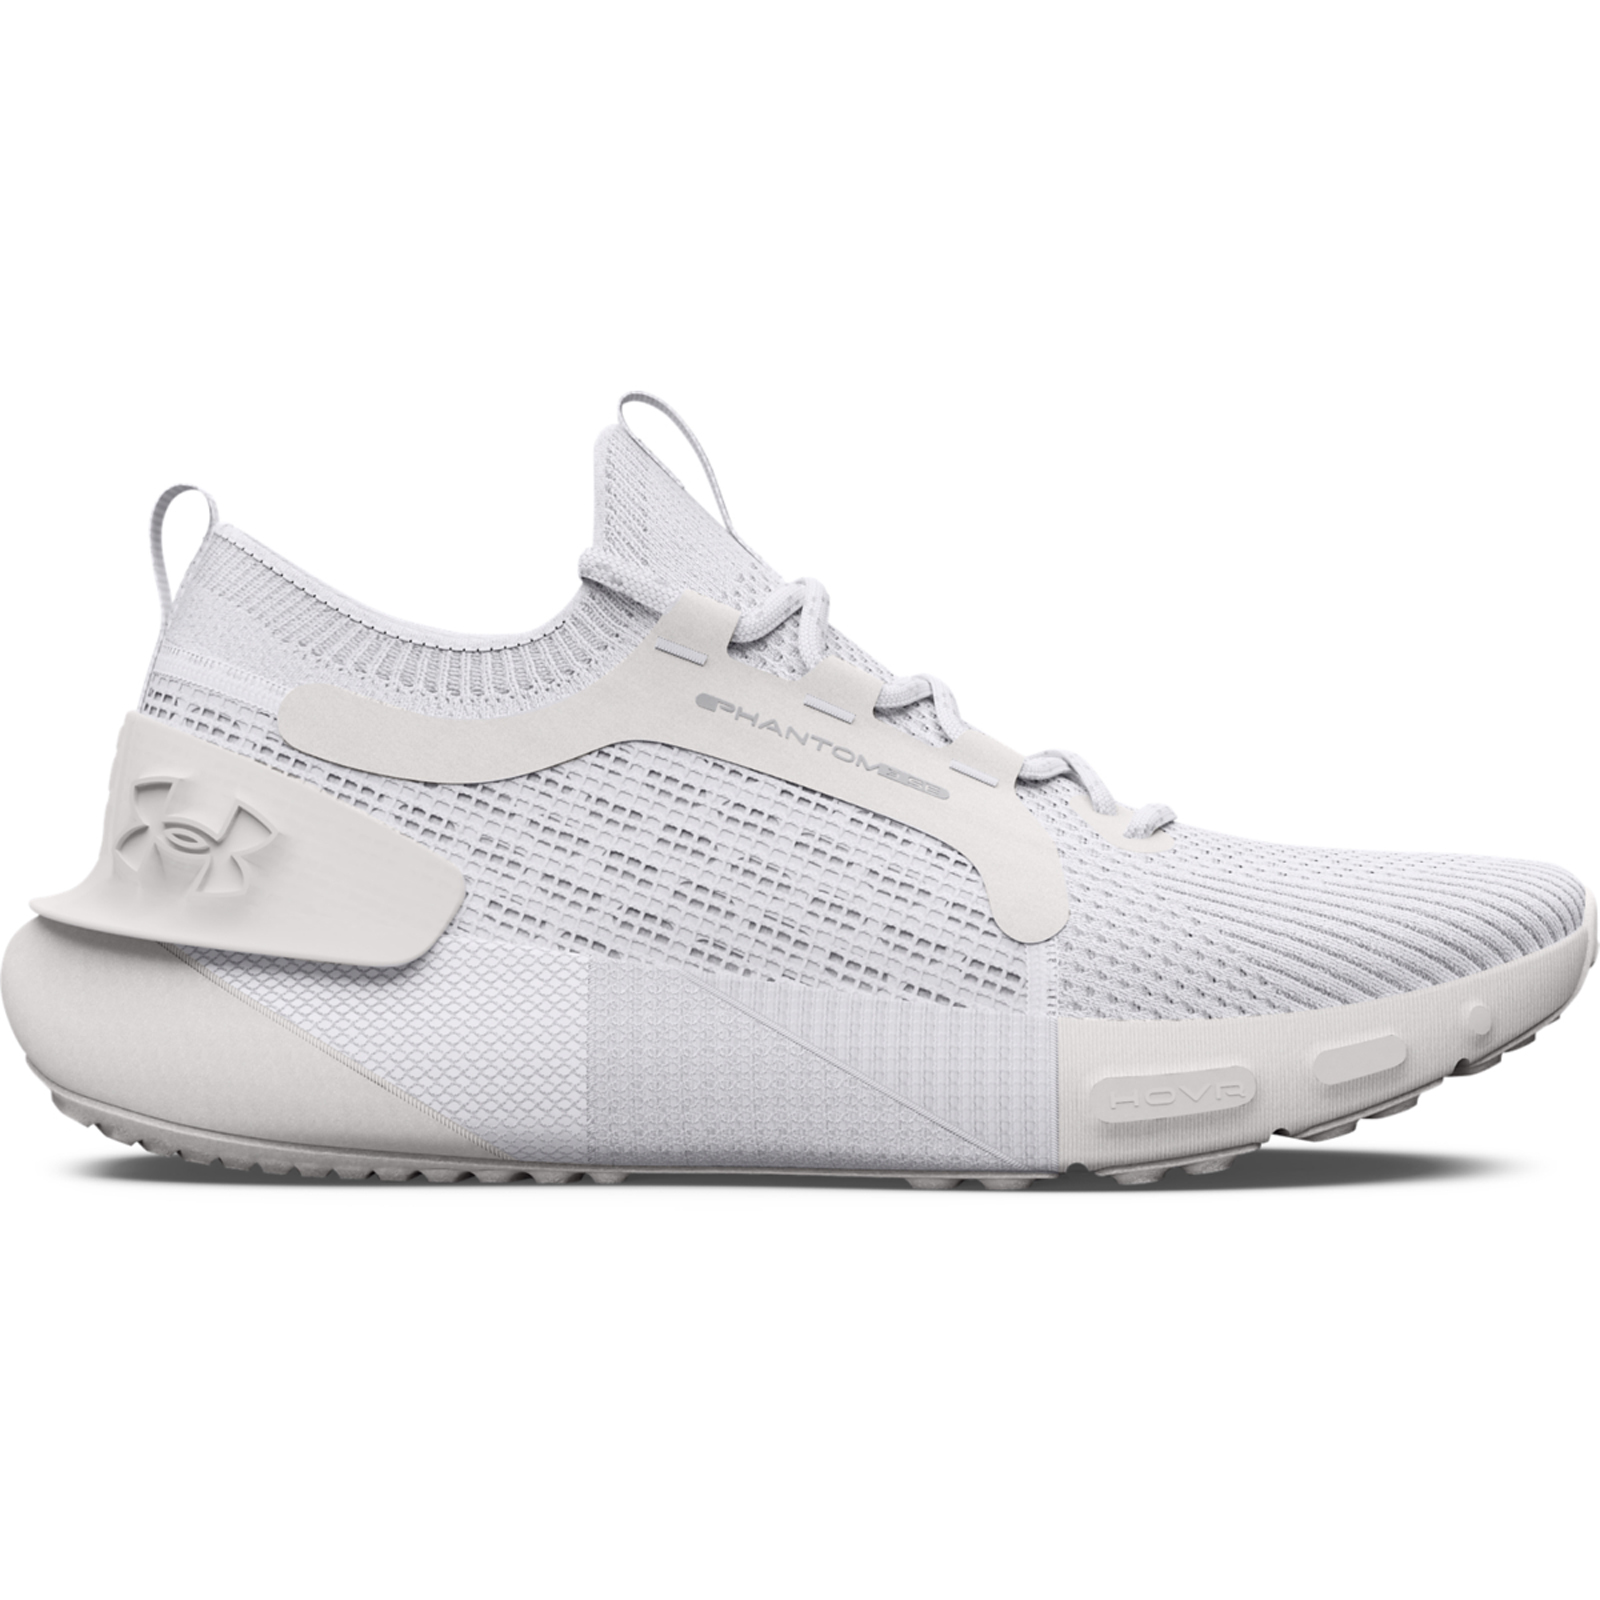 Under Armour - Men's UA HOVR™ Phantom 3 SE Running Shoes - White/White/Halo Gray Ανδρικά > Παπούτσια > Αθλητικά > Παπούτσι Low Cut